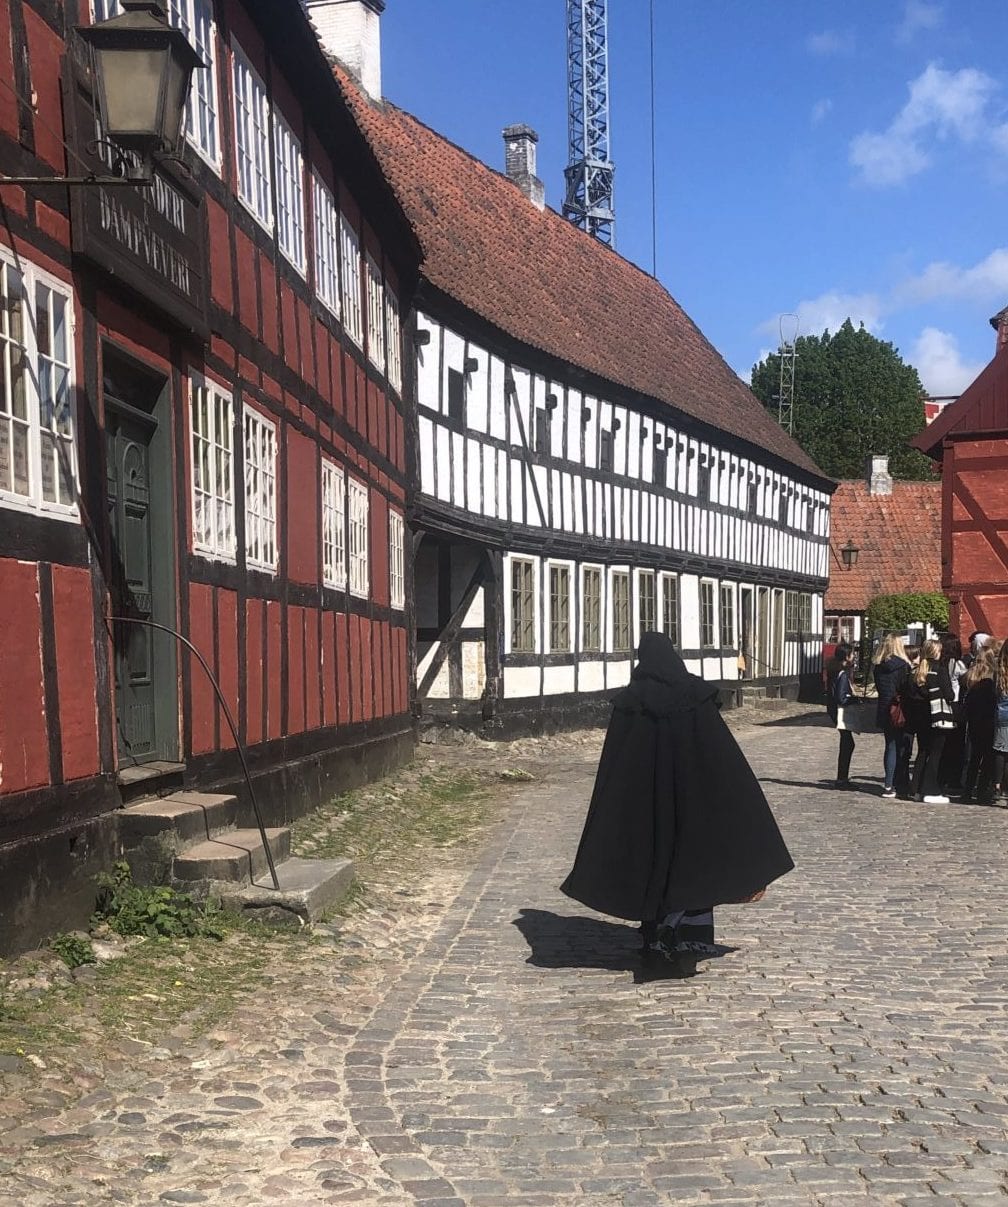 A citizen of Aarhus, Den Gamle Going About Their Day